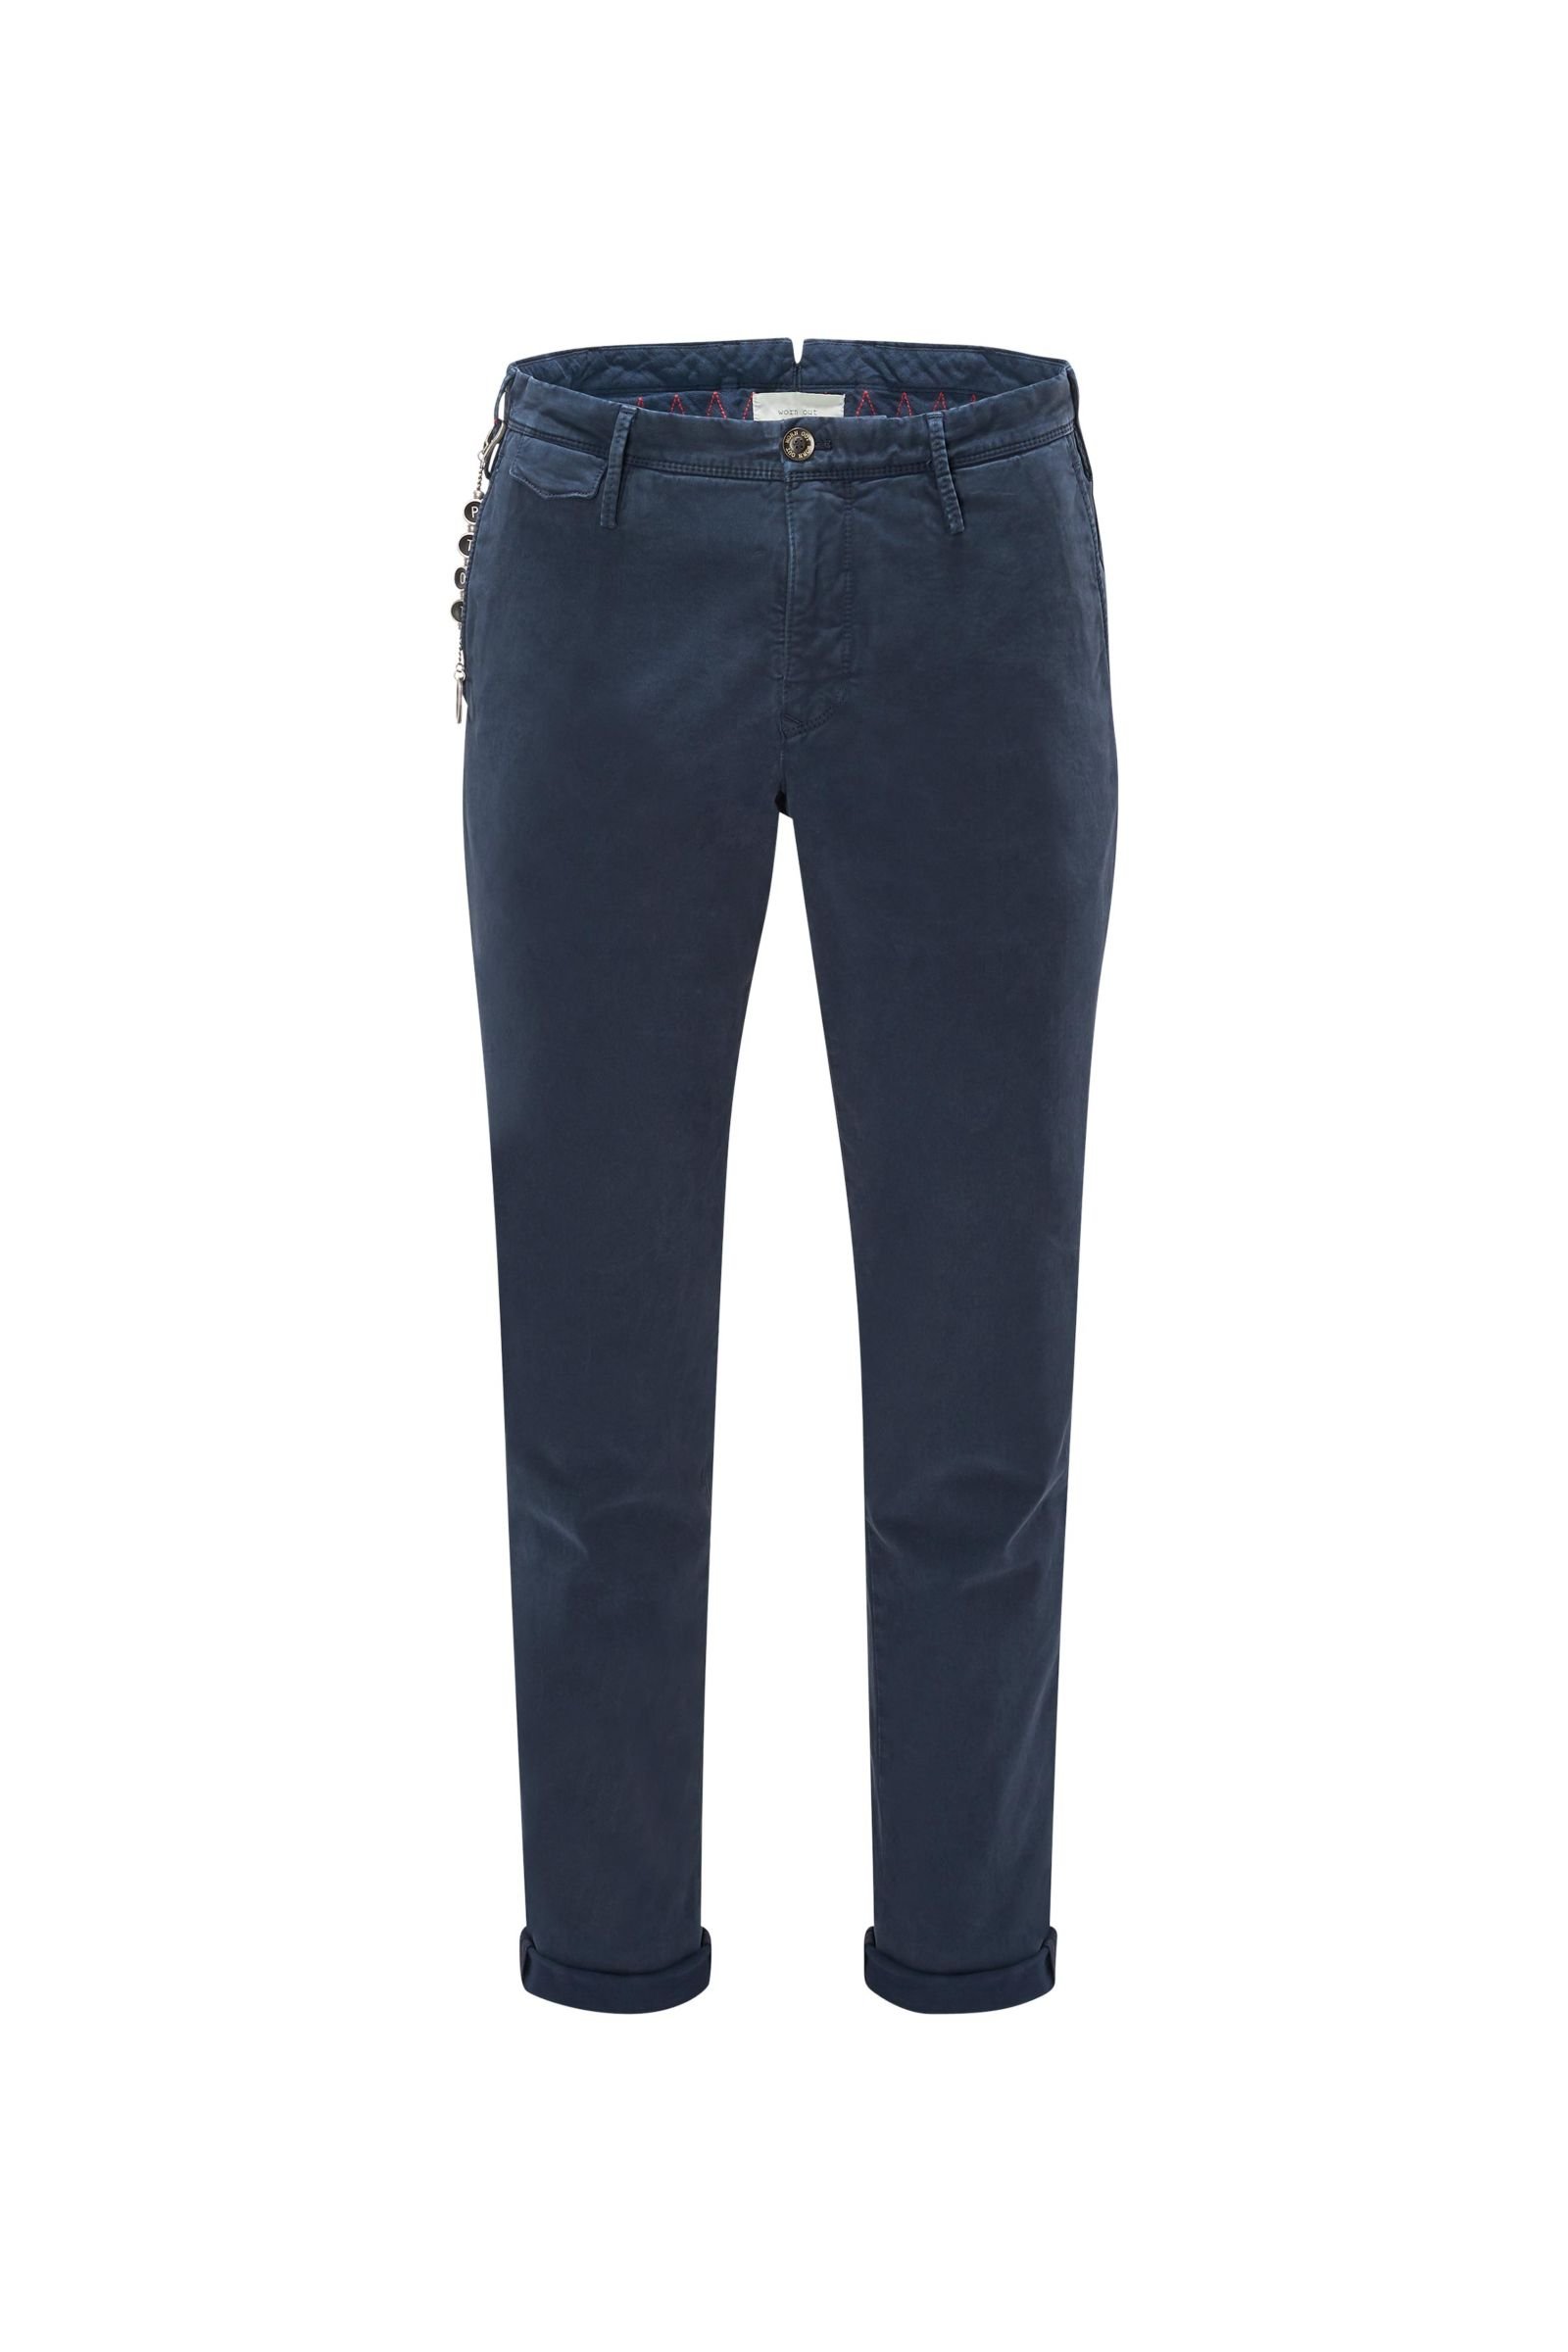 Cotton trousers 'Worn out Elegance' navy